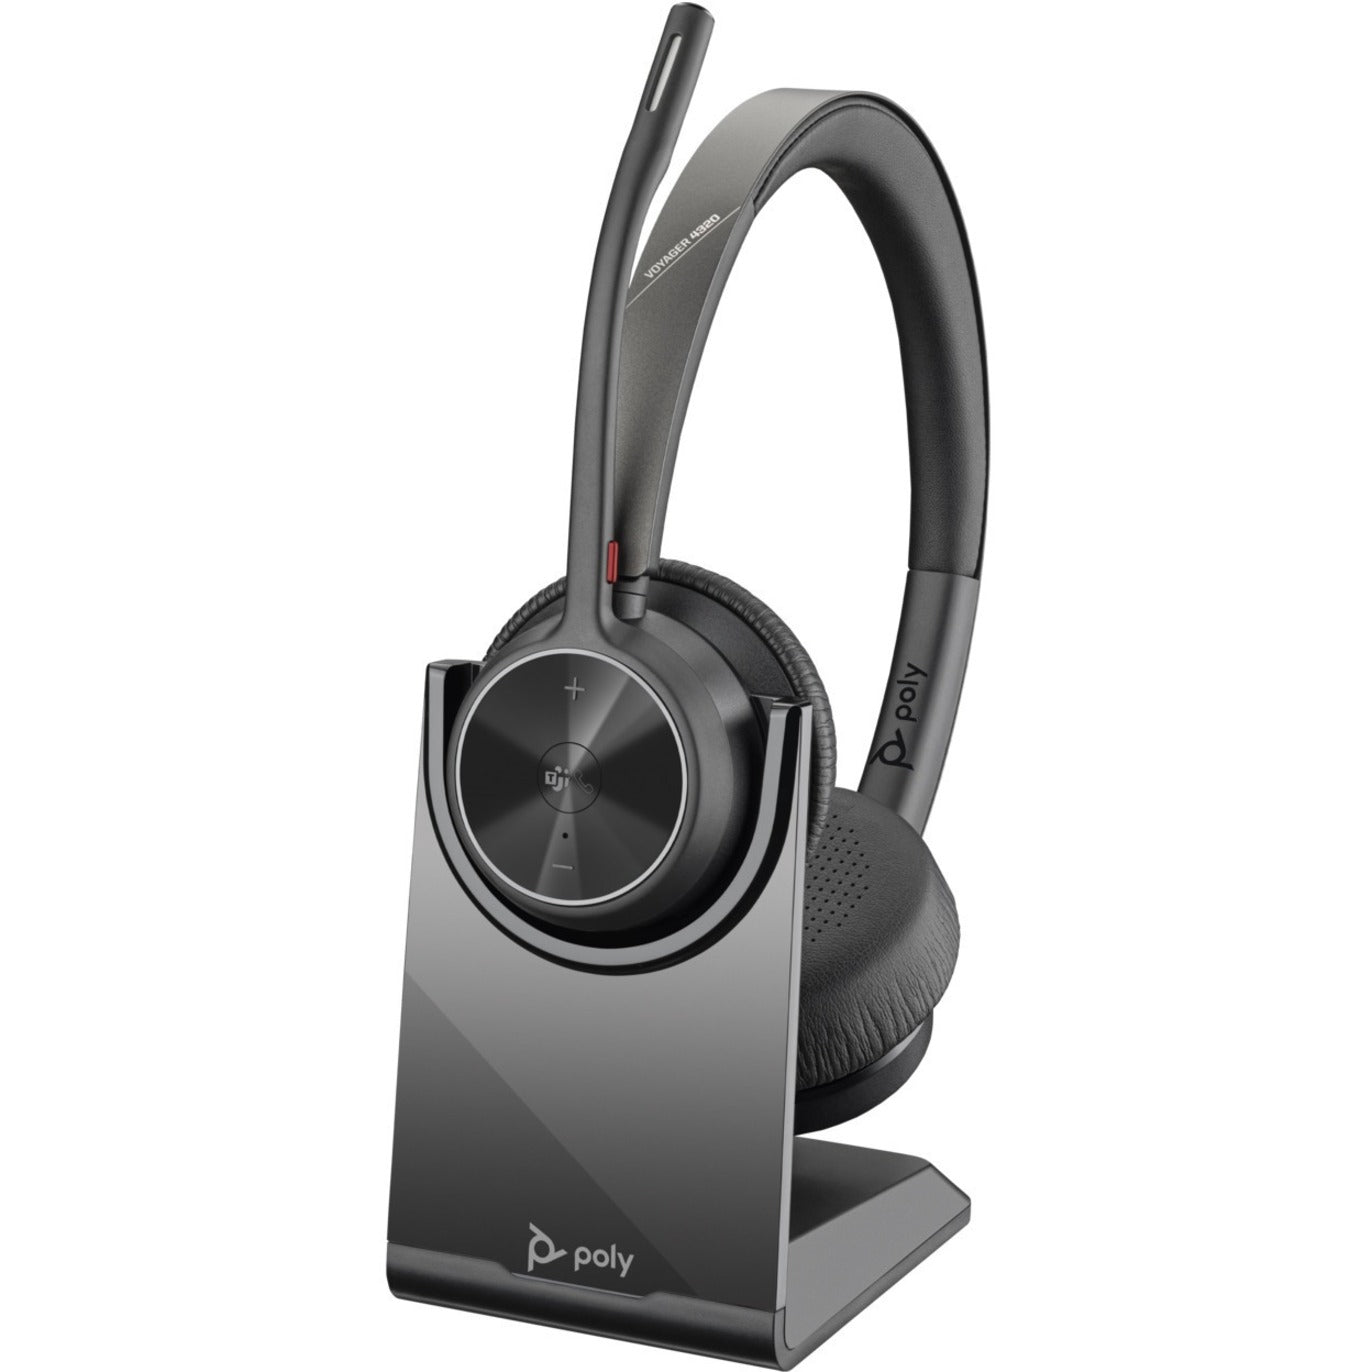 Poly 77Y99AA Voyager 4320 Headset With Charge Stand, Wireless Bluetooth Headset for Smartphone, Music, Office, PC, Mac